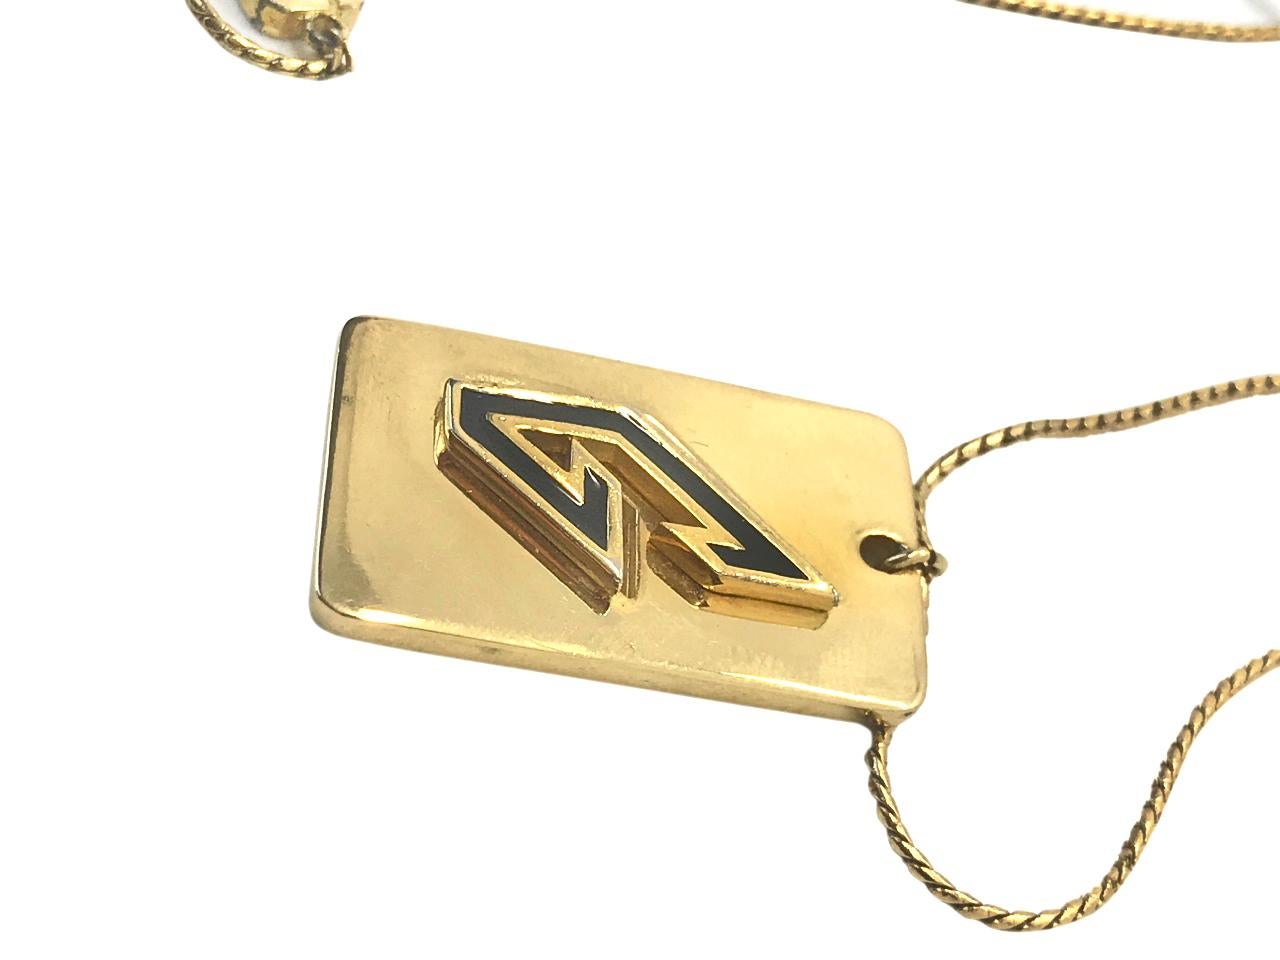 Givenchy 1970s (1979) Gold Plated G Logo Pendant Necklace.

This is a rare design from Givenchy's vintage heyday from 1977-1981 when quality was at it's best and every design oozed Studio 54 chic.  

Stamped Givenchy and dated on reverse of pendant